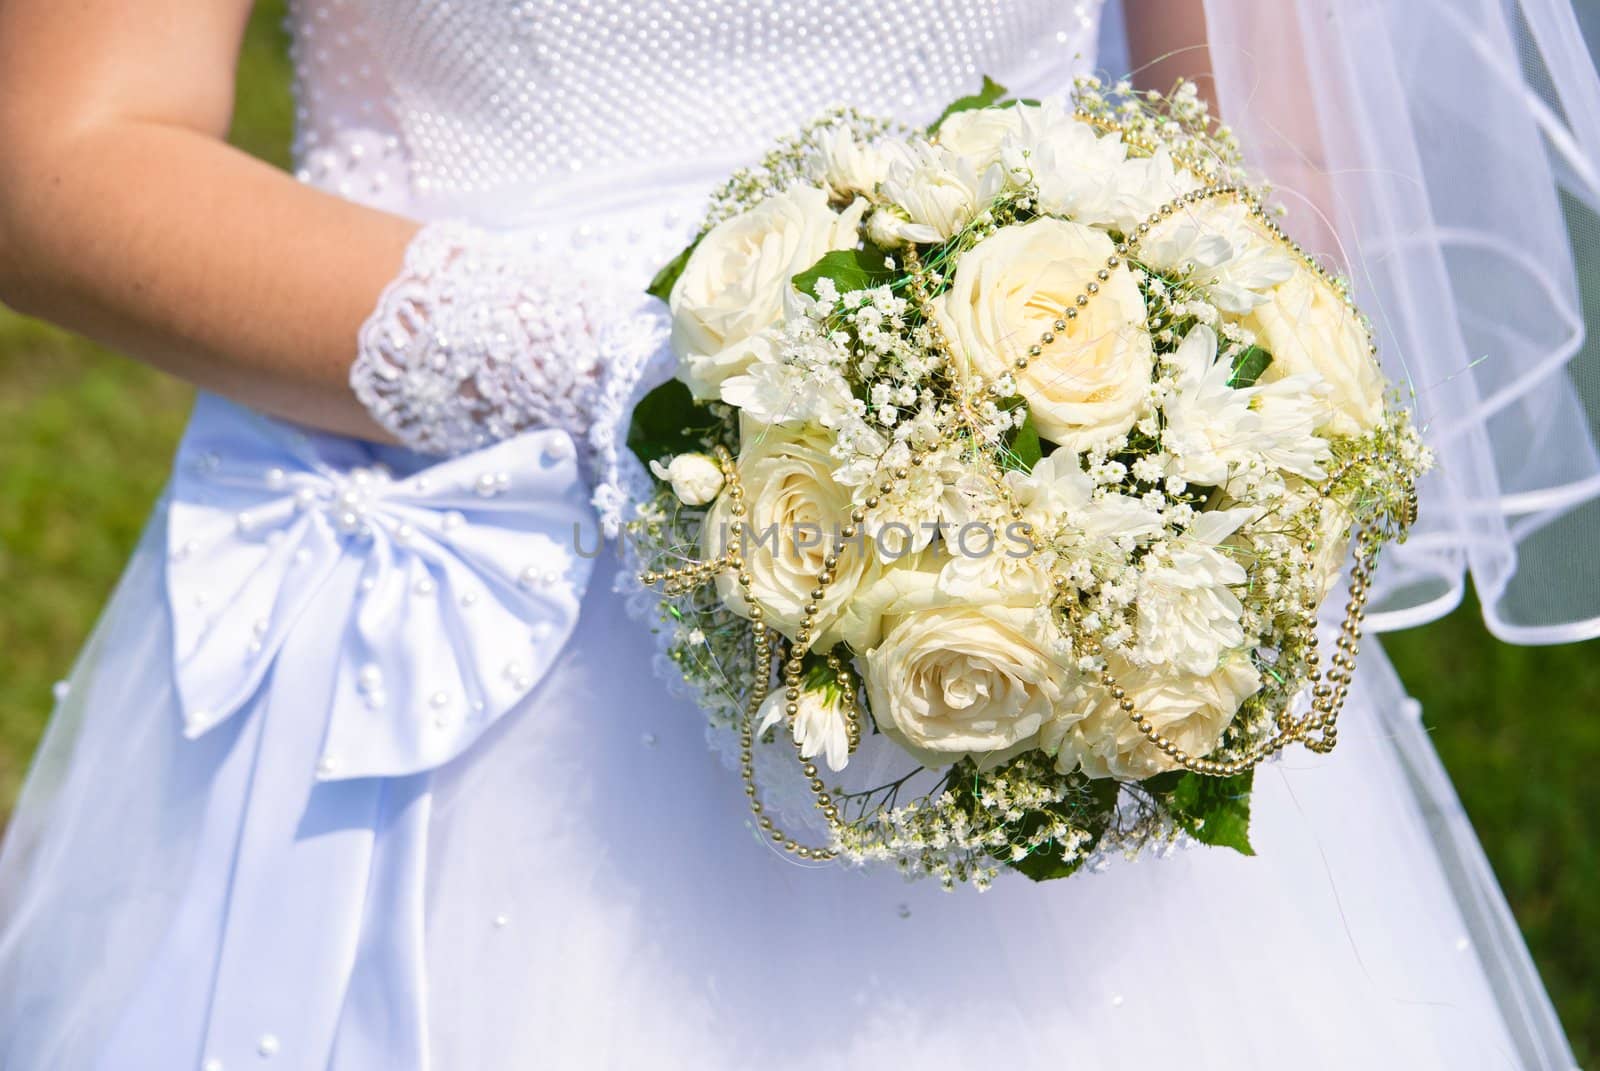 Bridal bouquet in the hand of bride